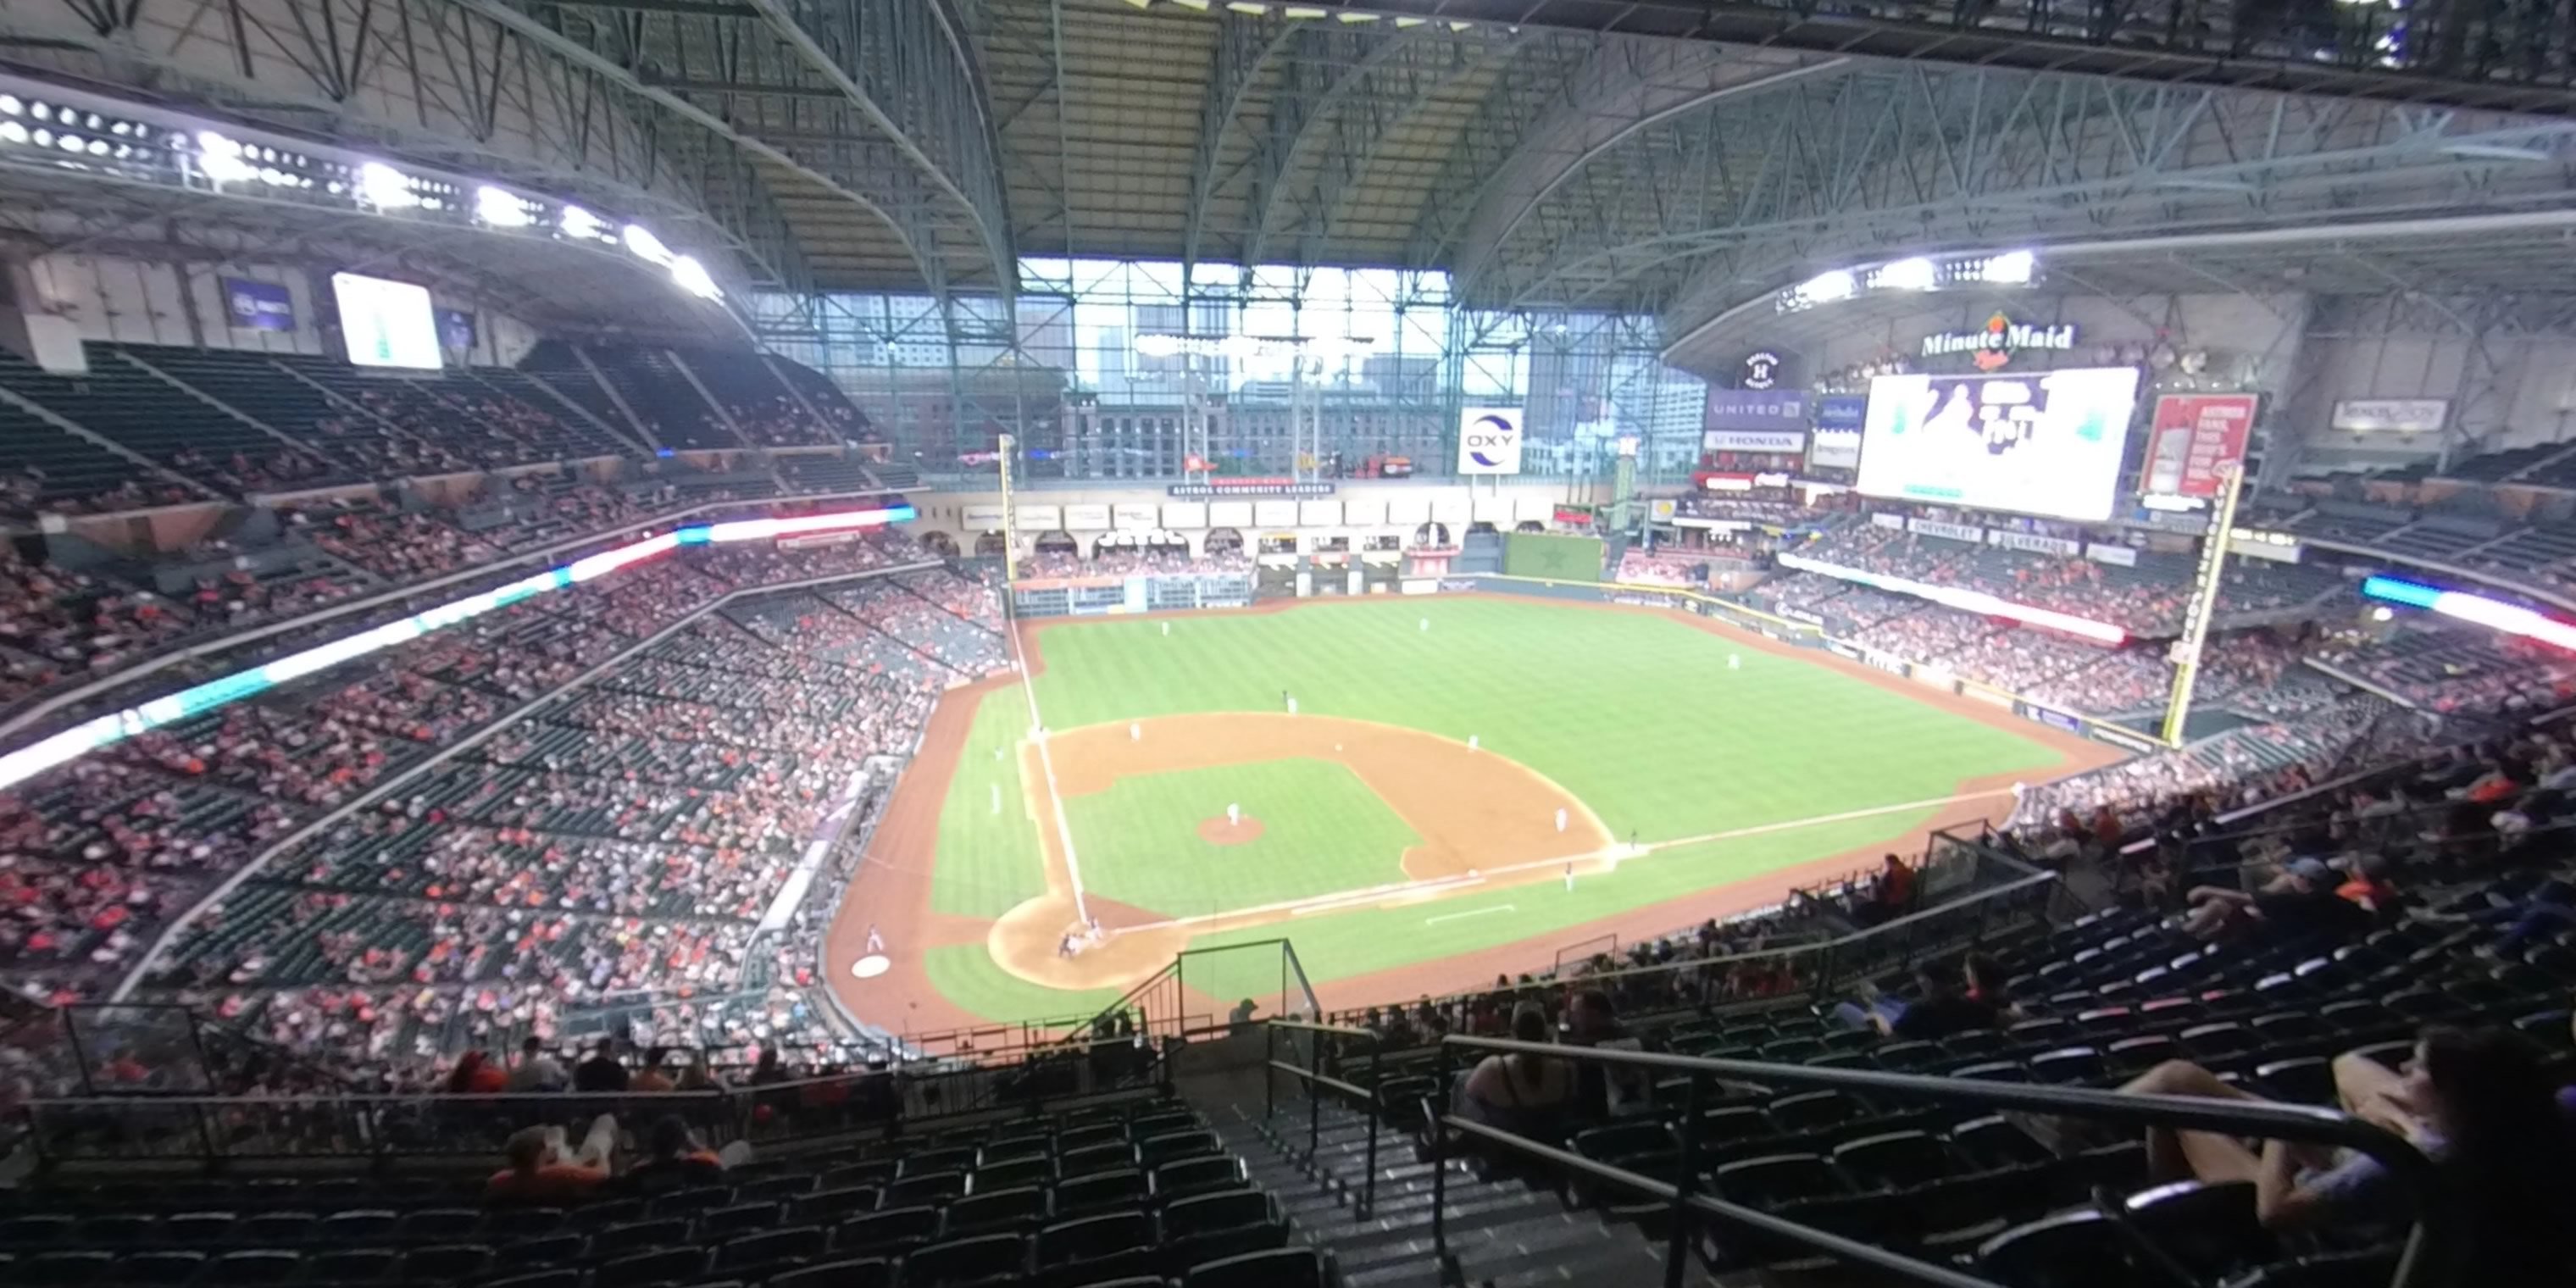 Section 423 at Minute Maid Park 